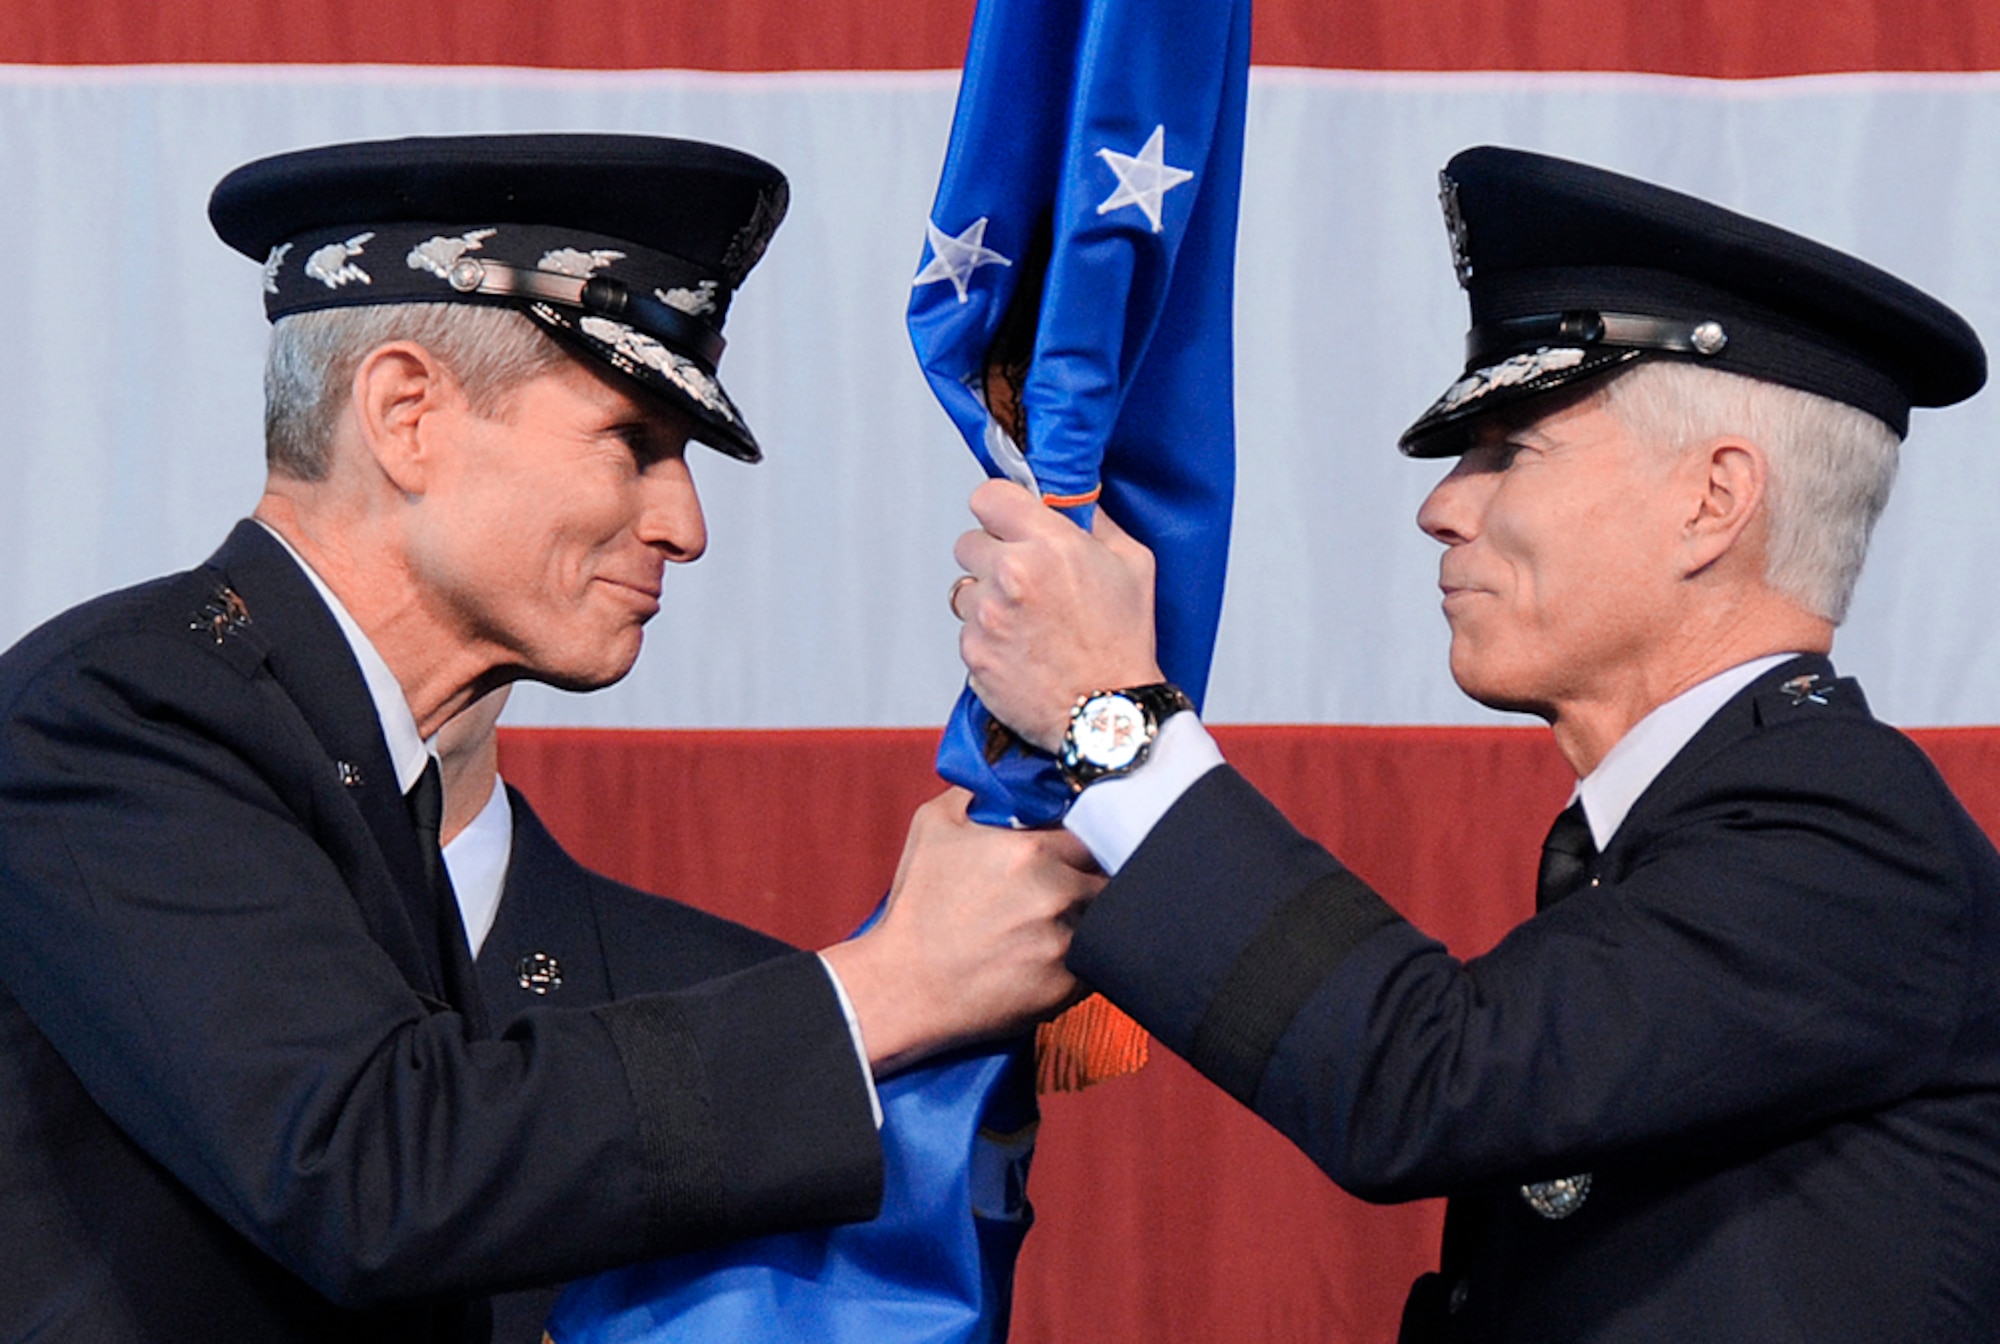 Air Force Chief of Staff Gen. Norton Schwartz (left) hands the Air Force Space Command flag to Gen. William L. Shelton (right), as General Shelton becomes the 15th commander of AFSPC in a ceremony Jan. 5, 2011, at Peterson Air Force Base, Colo. (U.S. Air Force photo/Duncan Wood)